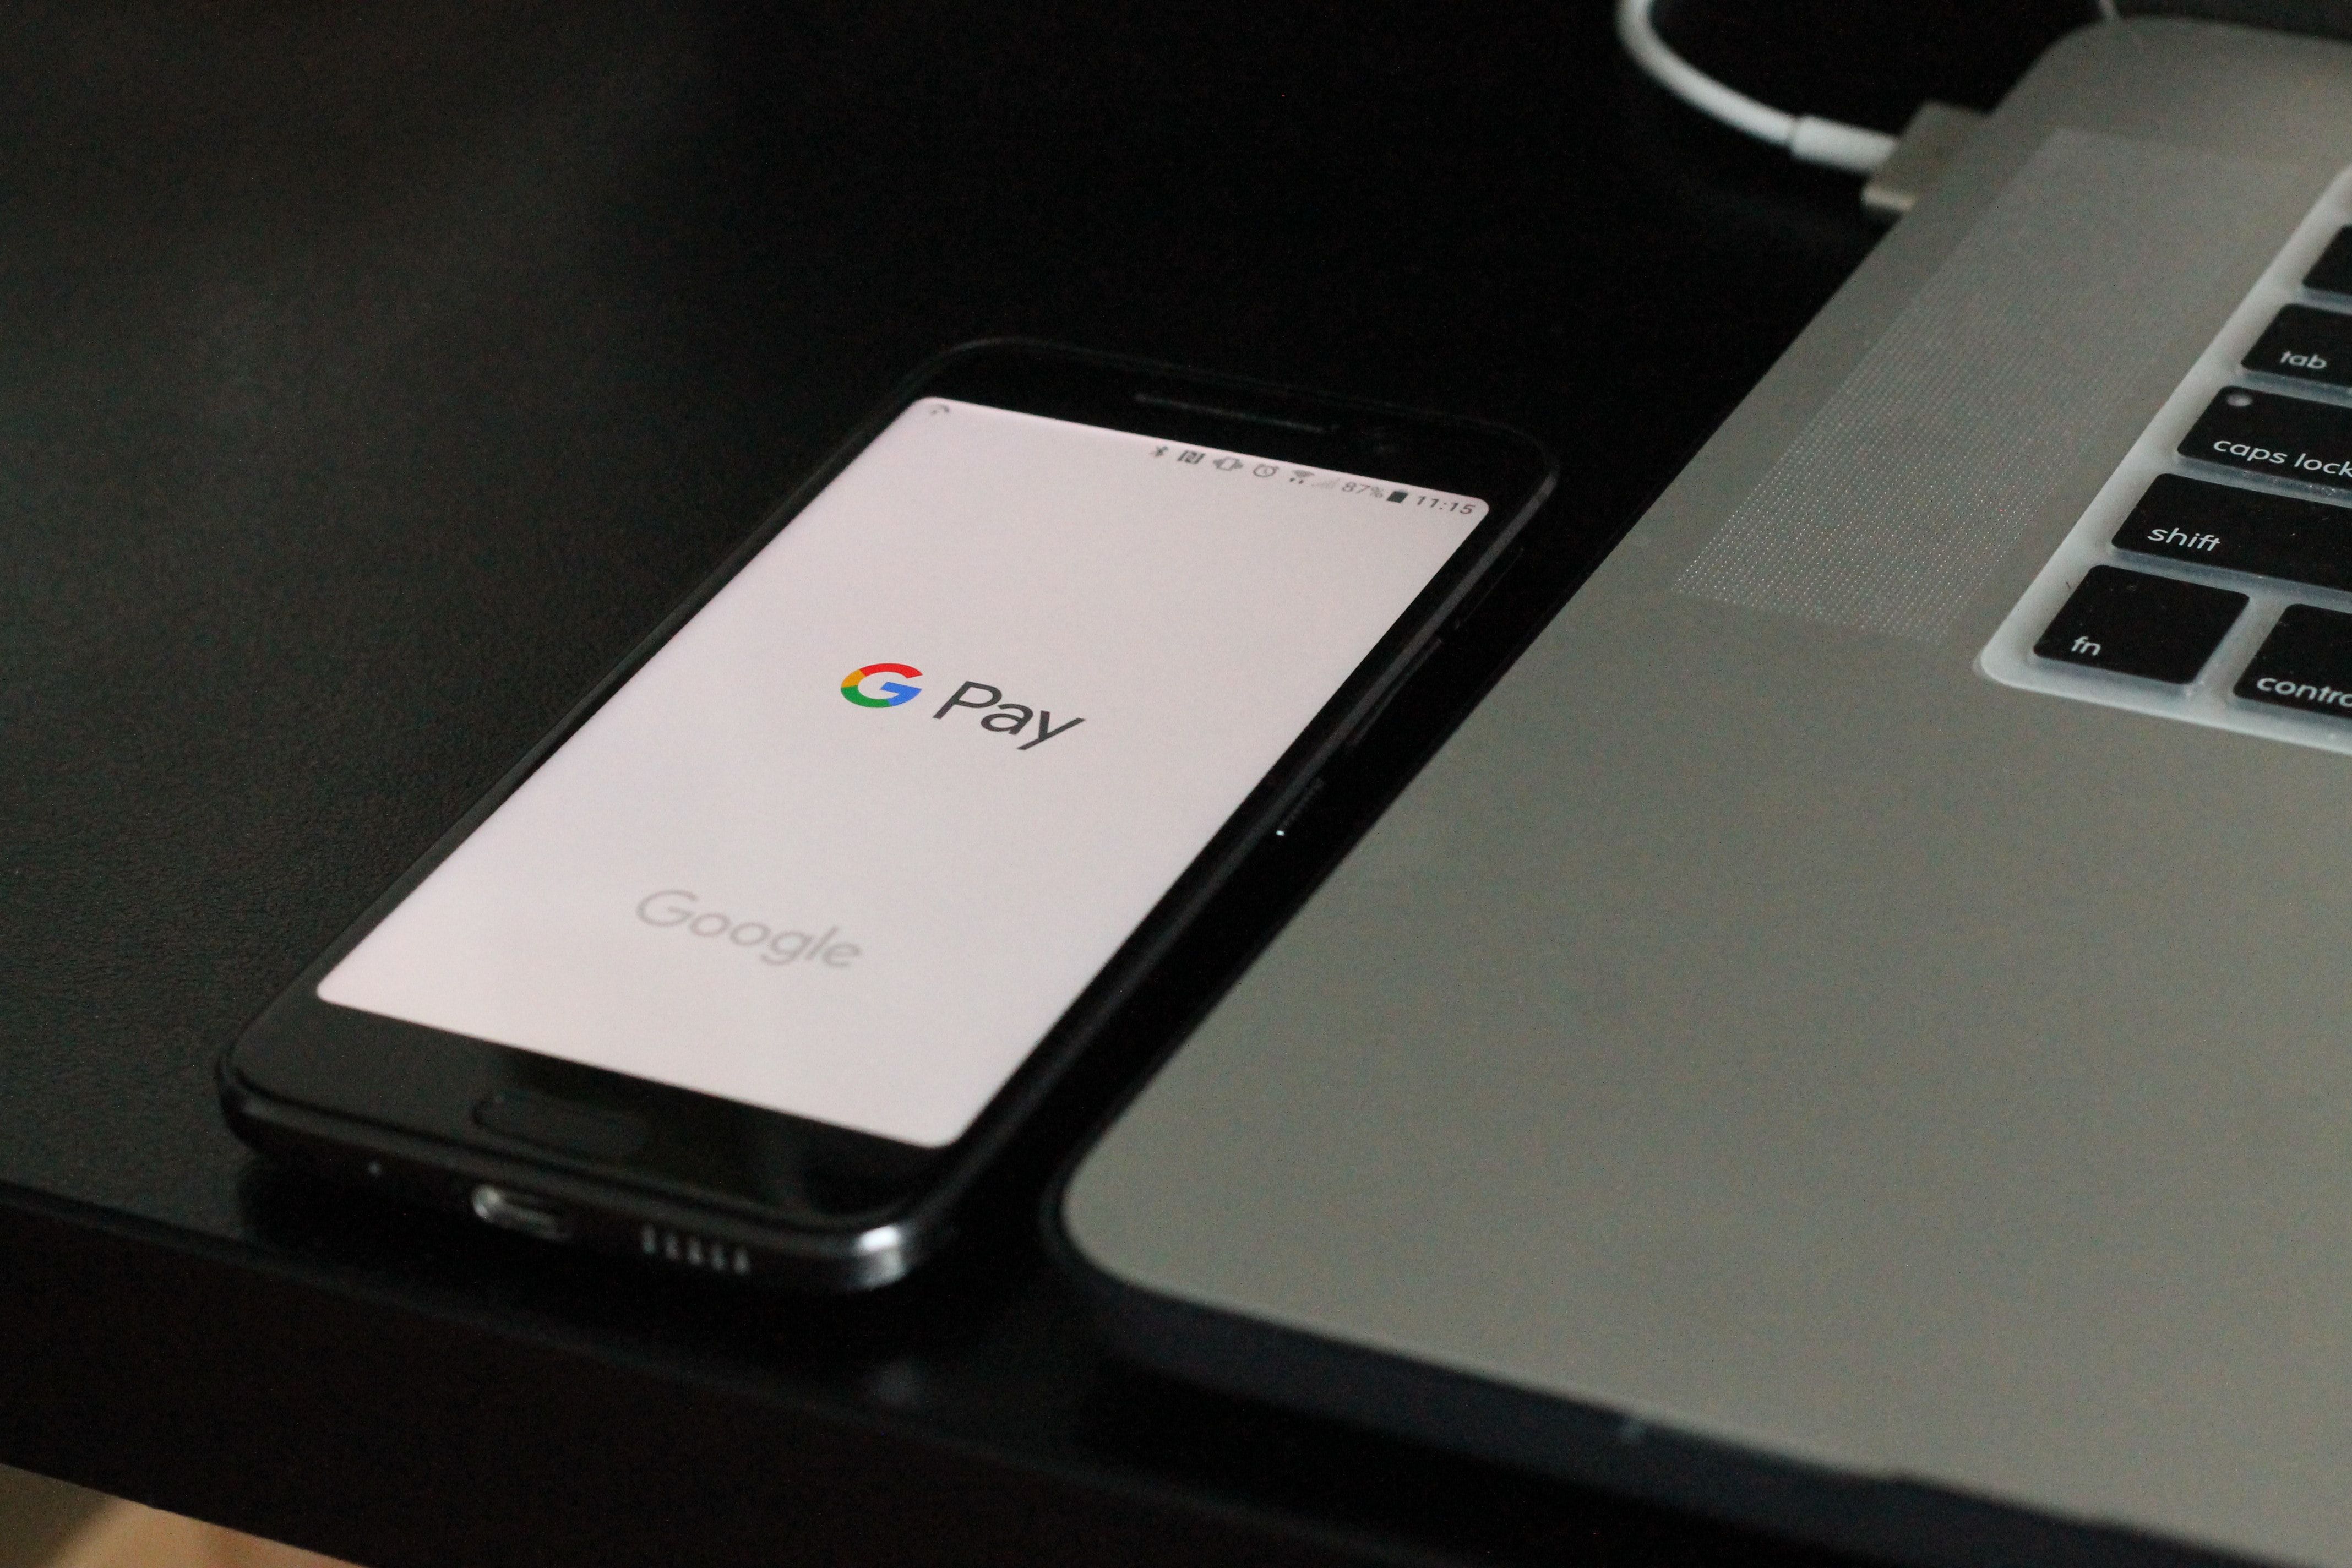 Google Pay on an Android phone